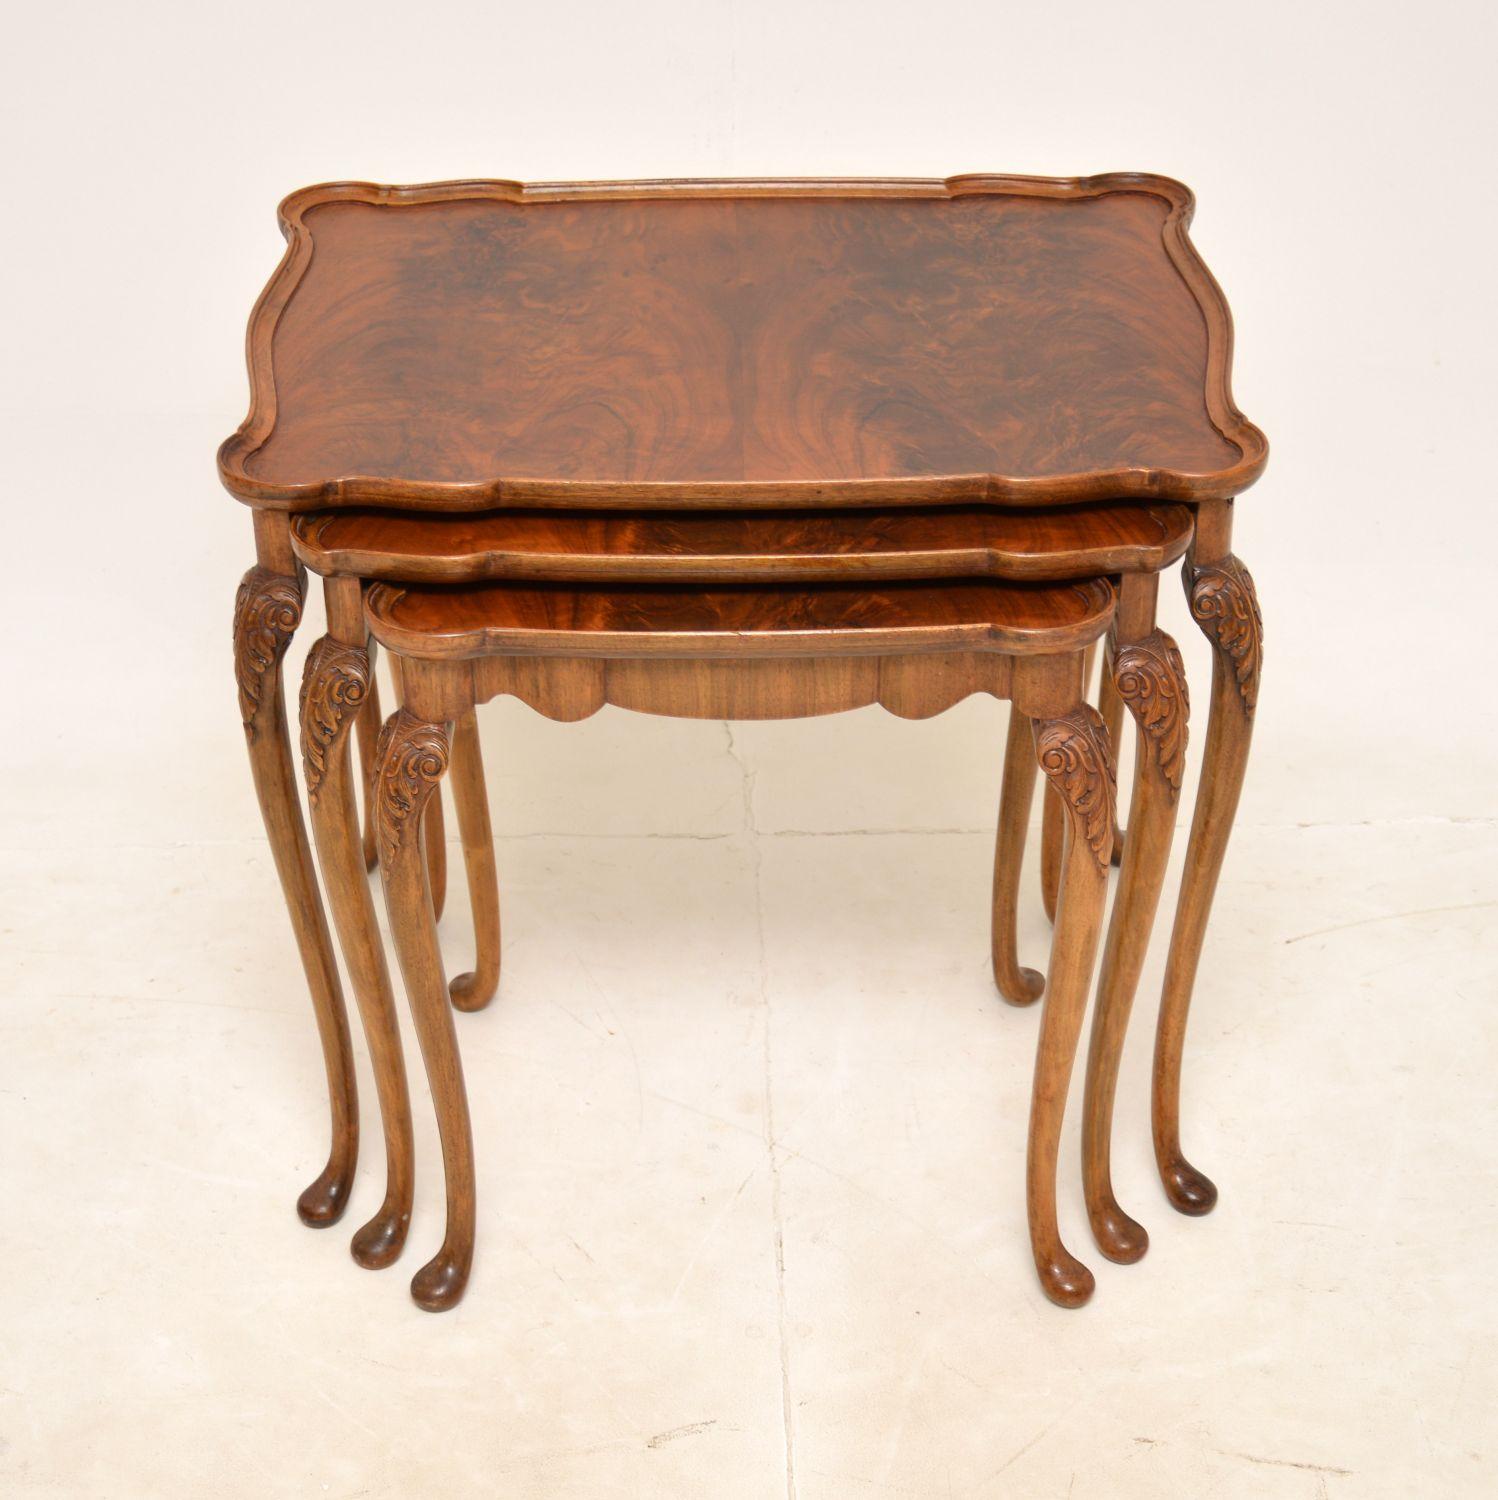 A fantastic antique walnut nest of three tables, this was made in England and dates from around the 1900-1920 period.

This is larger and more substantial than most nests of tables, the quality is superb. The pie crust tops have serpentine edges,